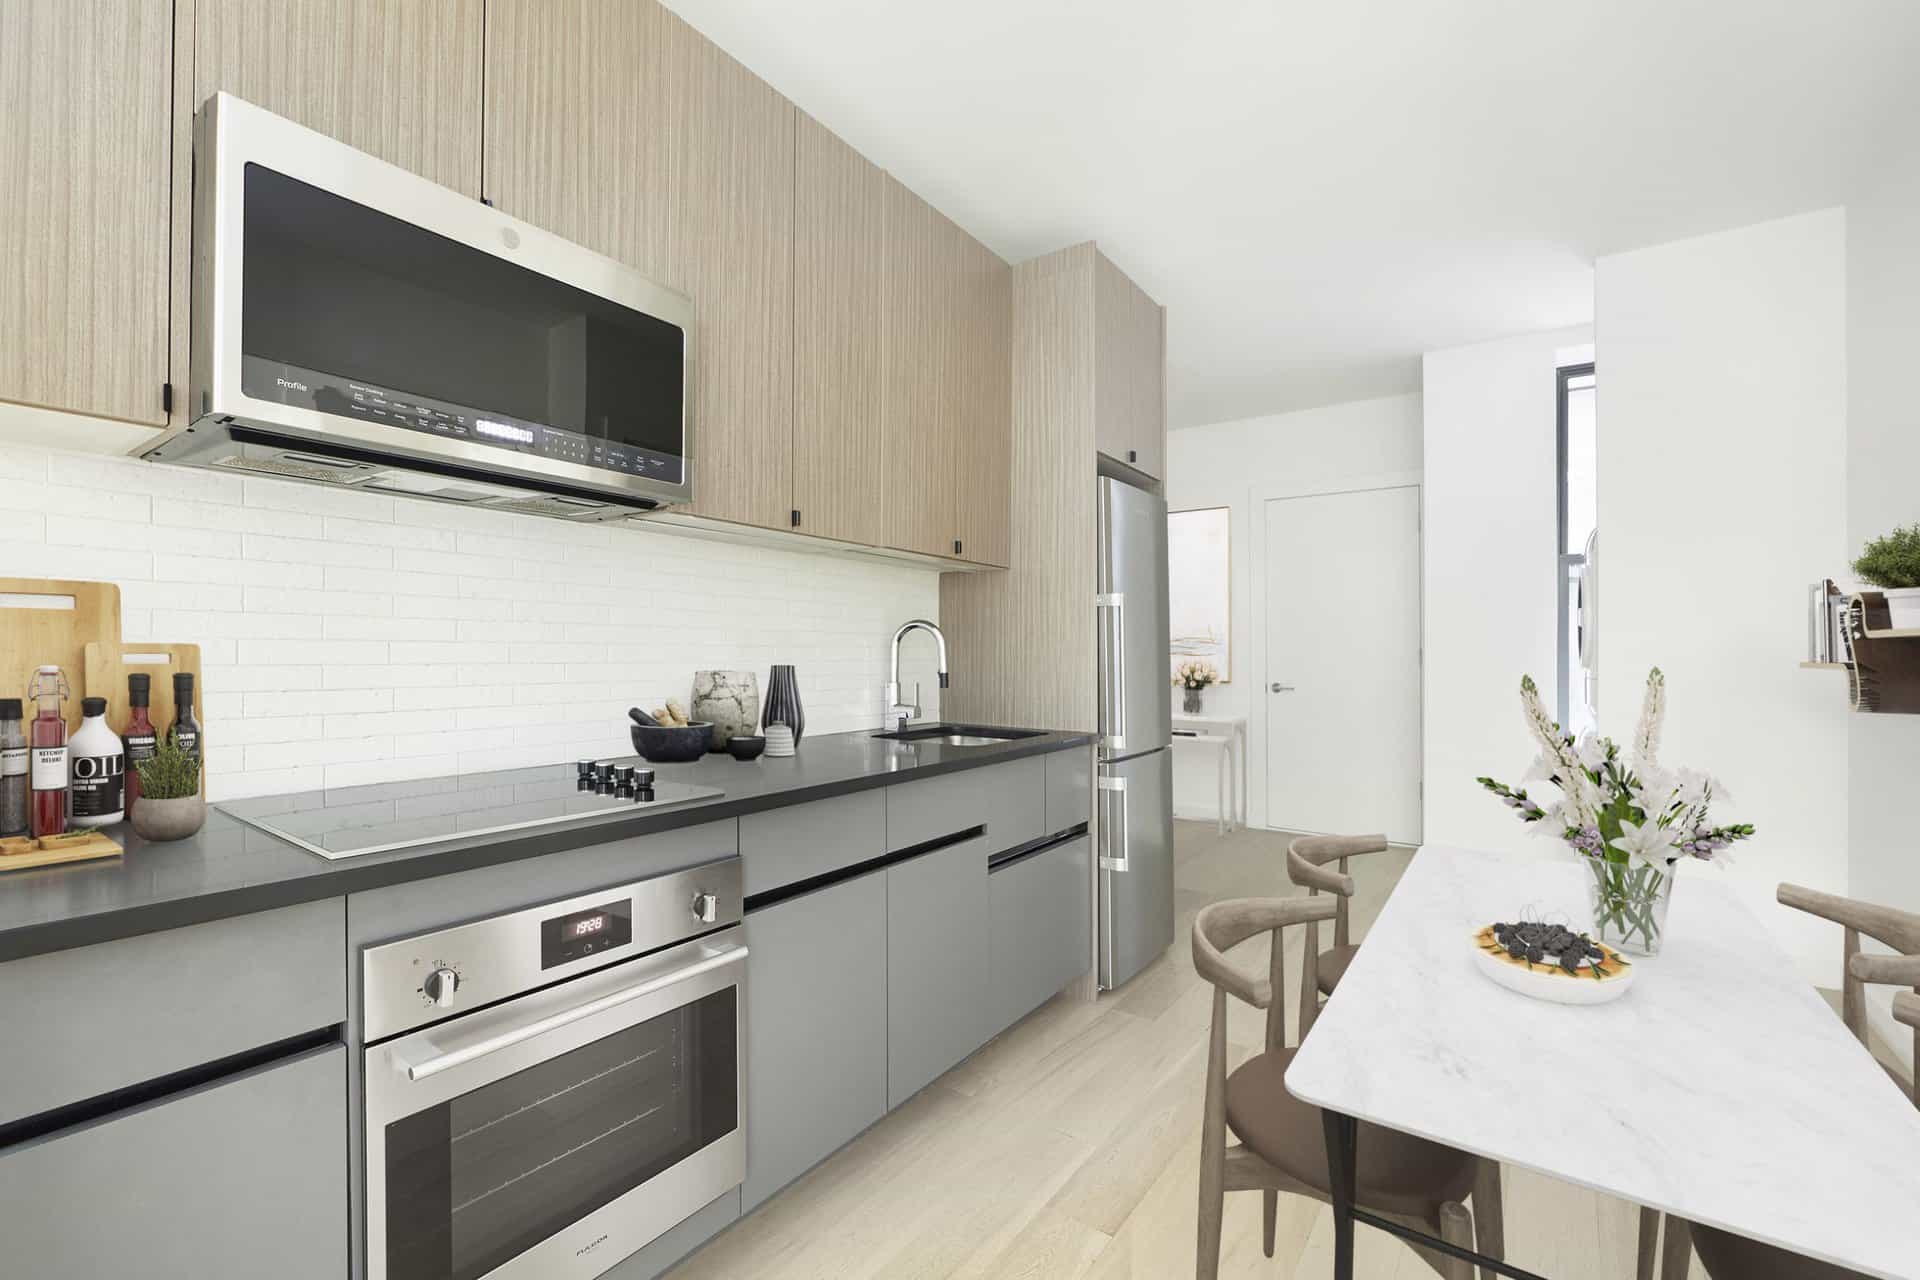 Kitchen at 244 East 7th Street apartments in New York. Open kitchen with stainless steel appliances and dining table.